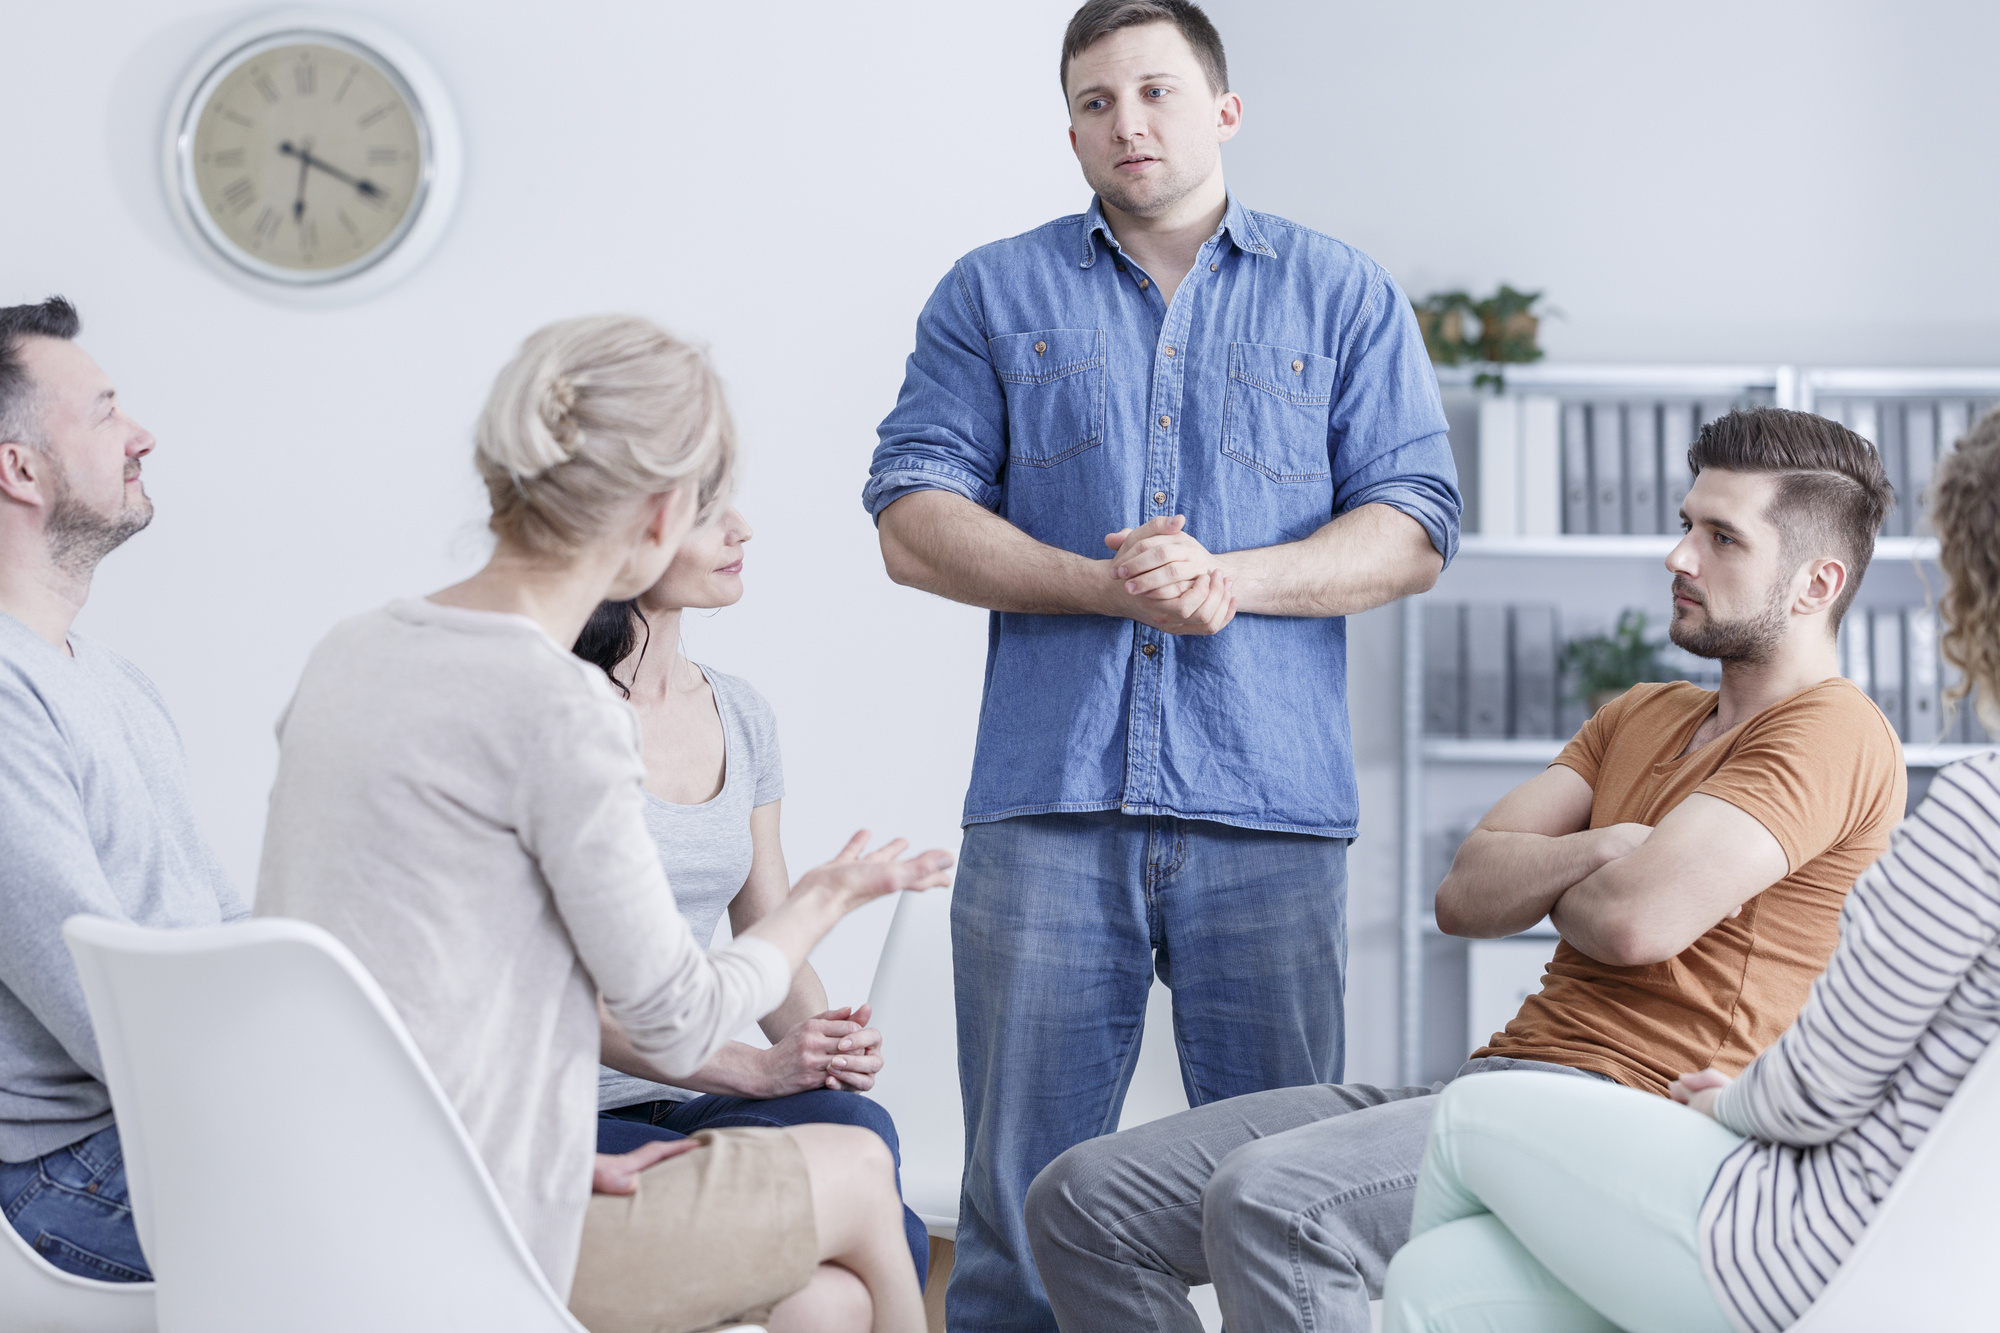 5 Tips to Hold a Successful Intervention for a Loved One